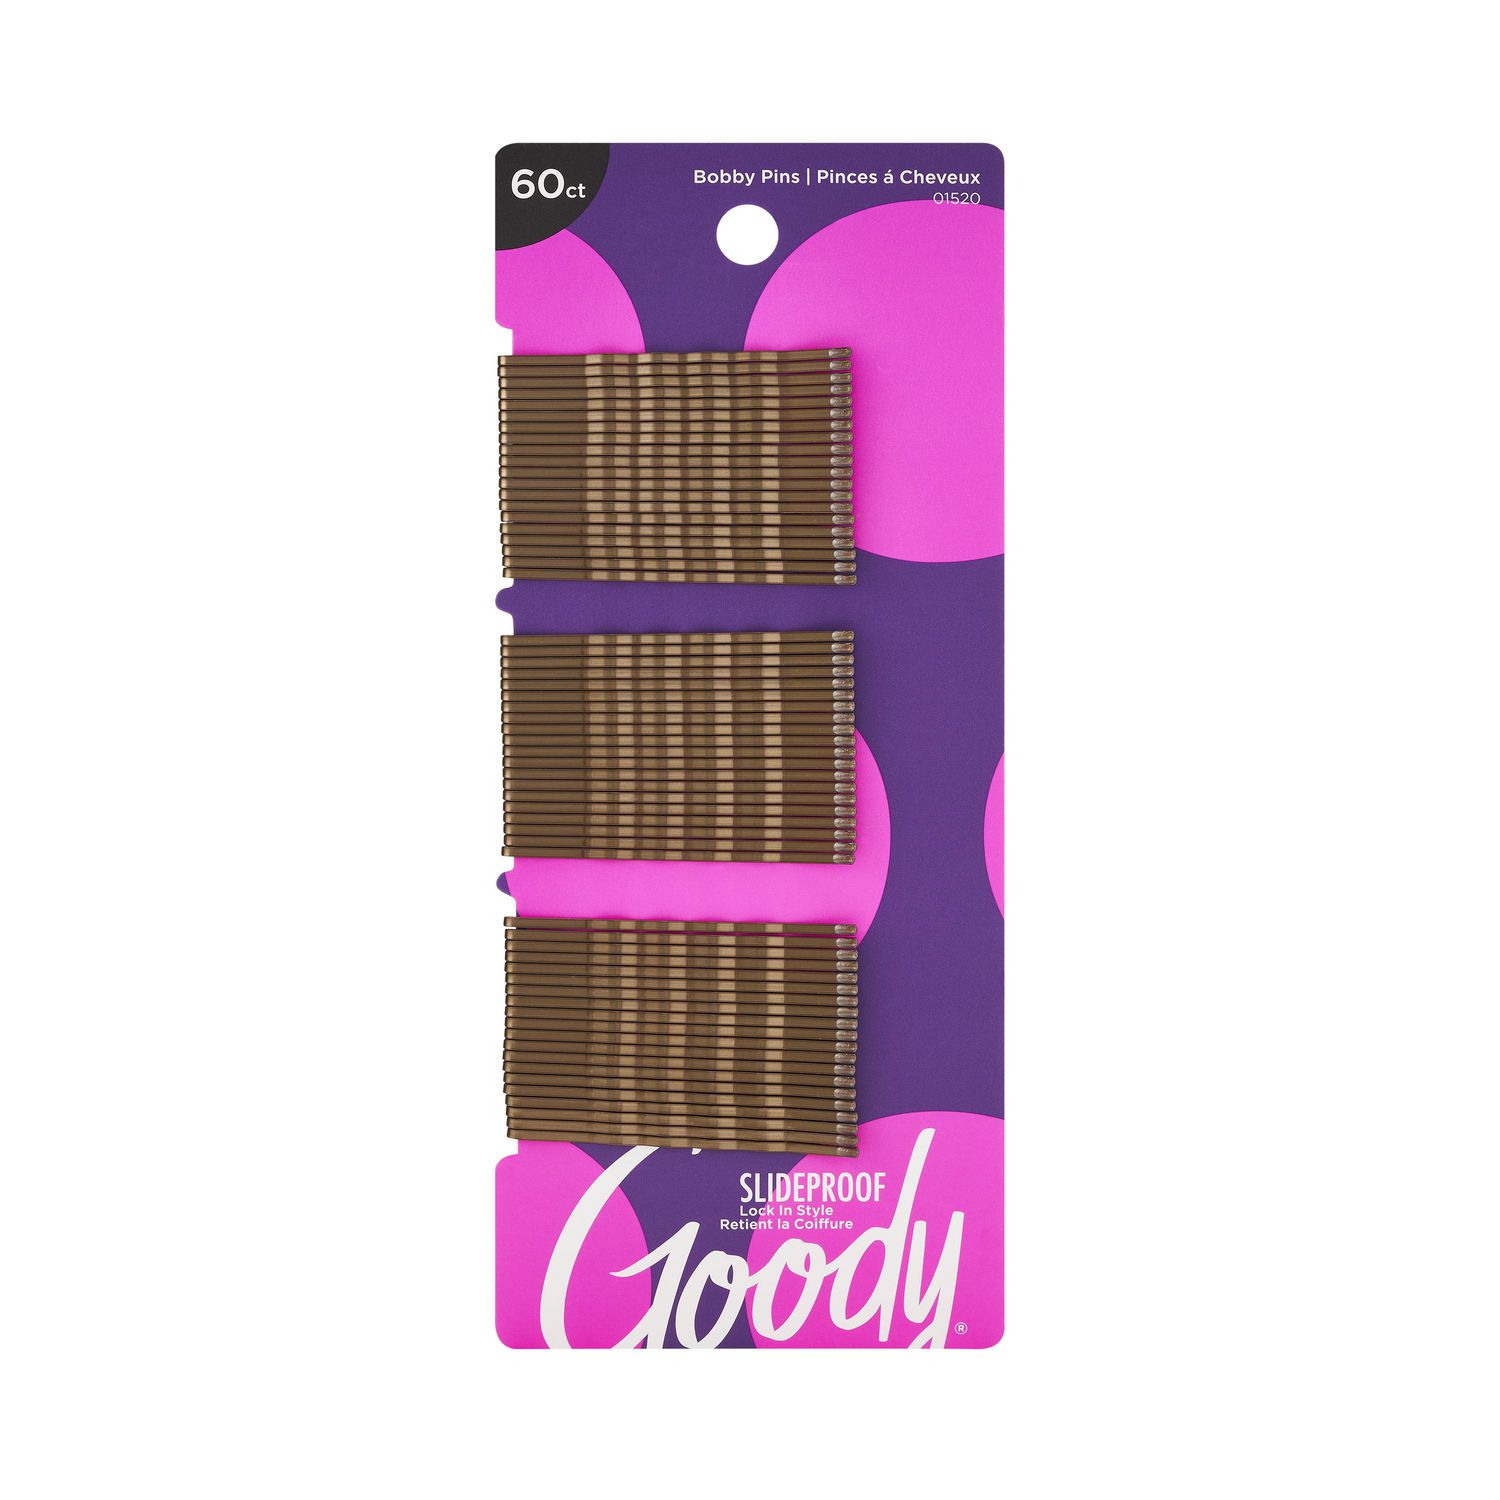 Goody Ouchless Bobby Pins, Slide-Proof Black Hair Pins, 60 Ct | Walmart  Canada